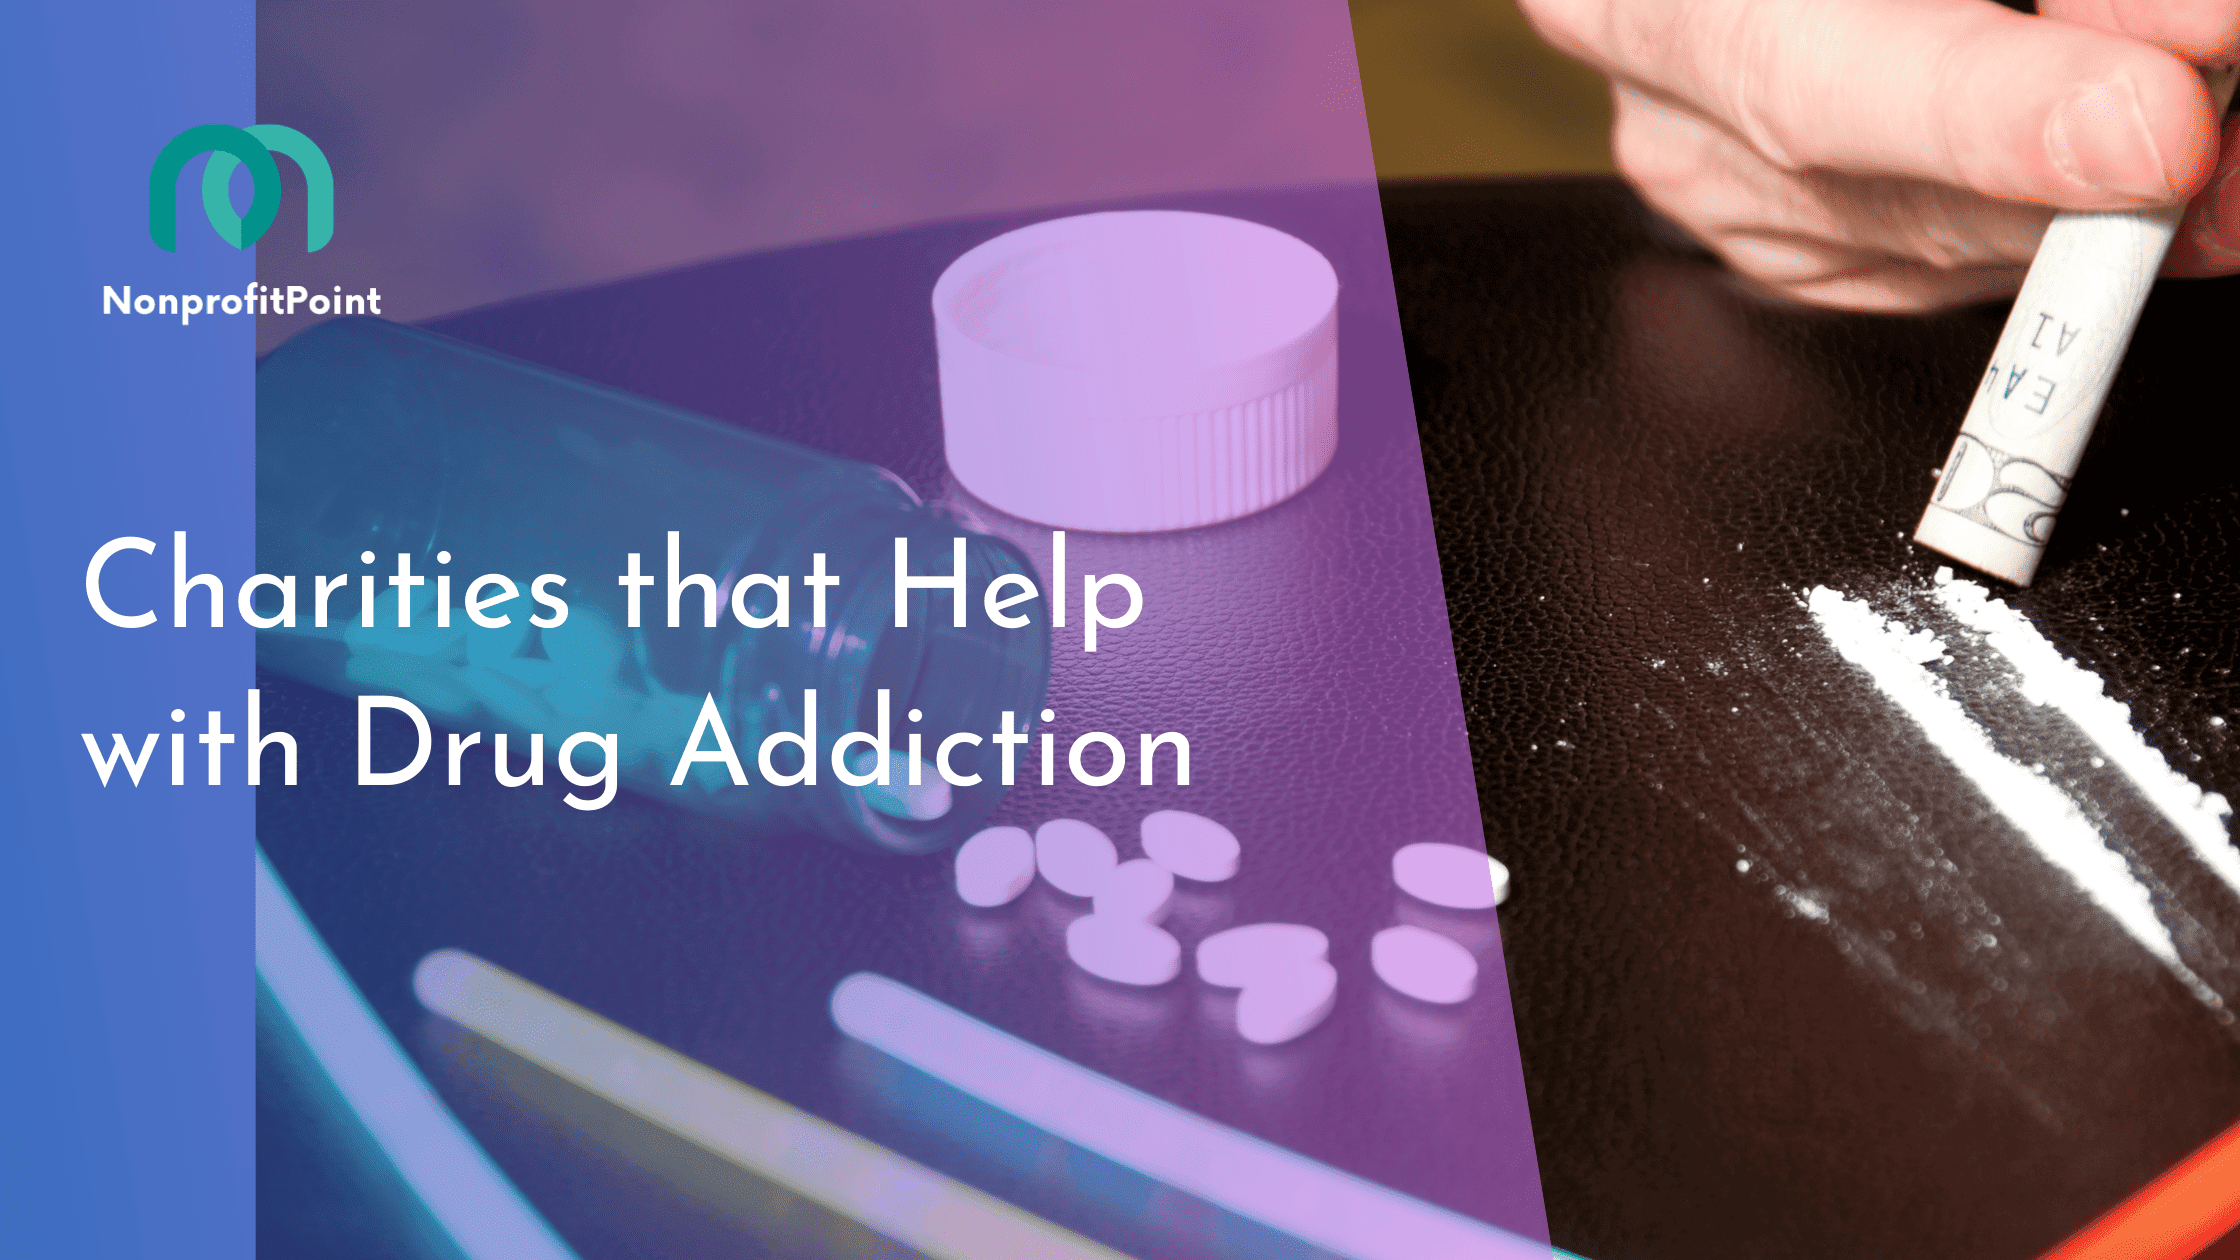 Charities that Help with Drug Addiction